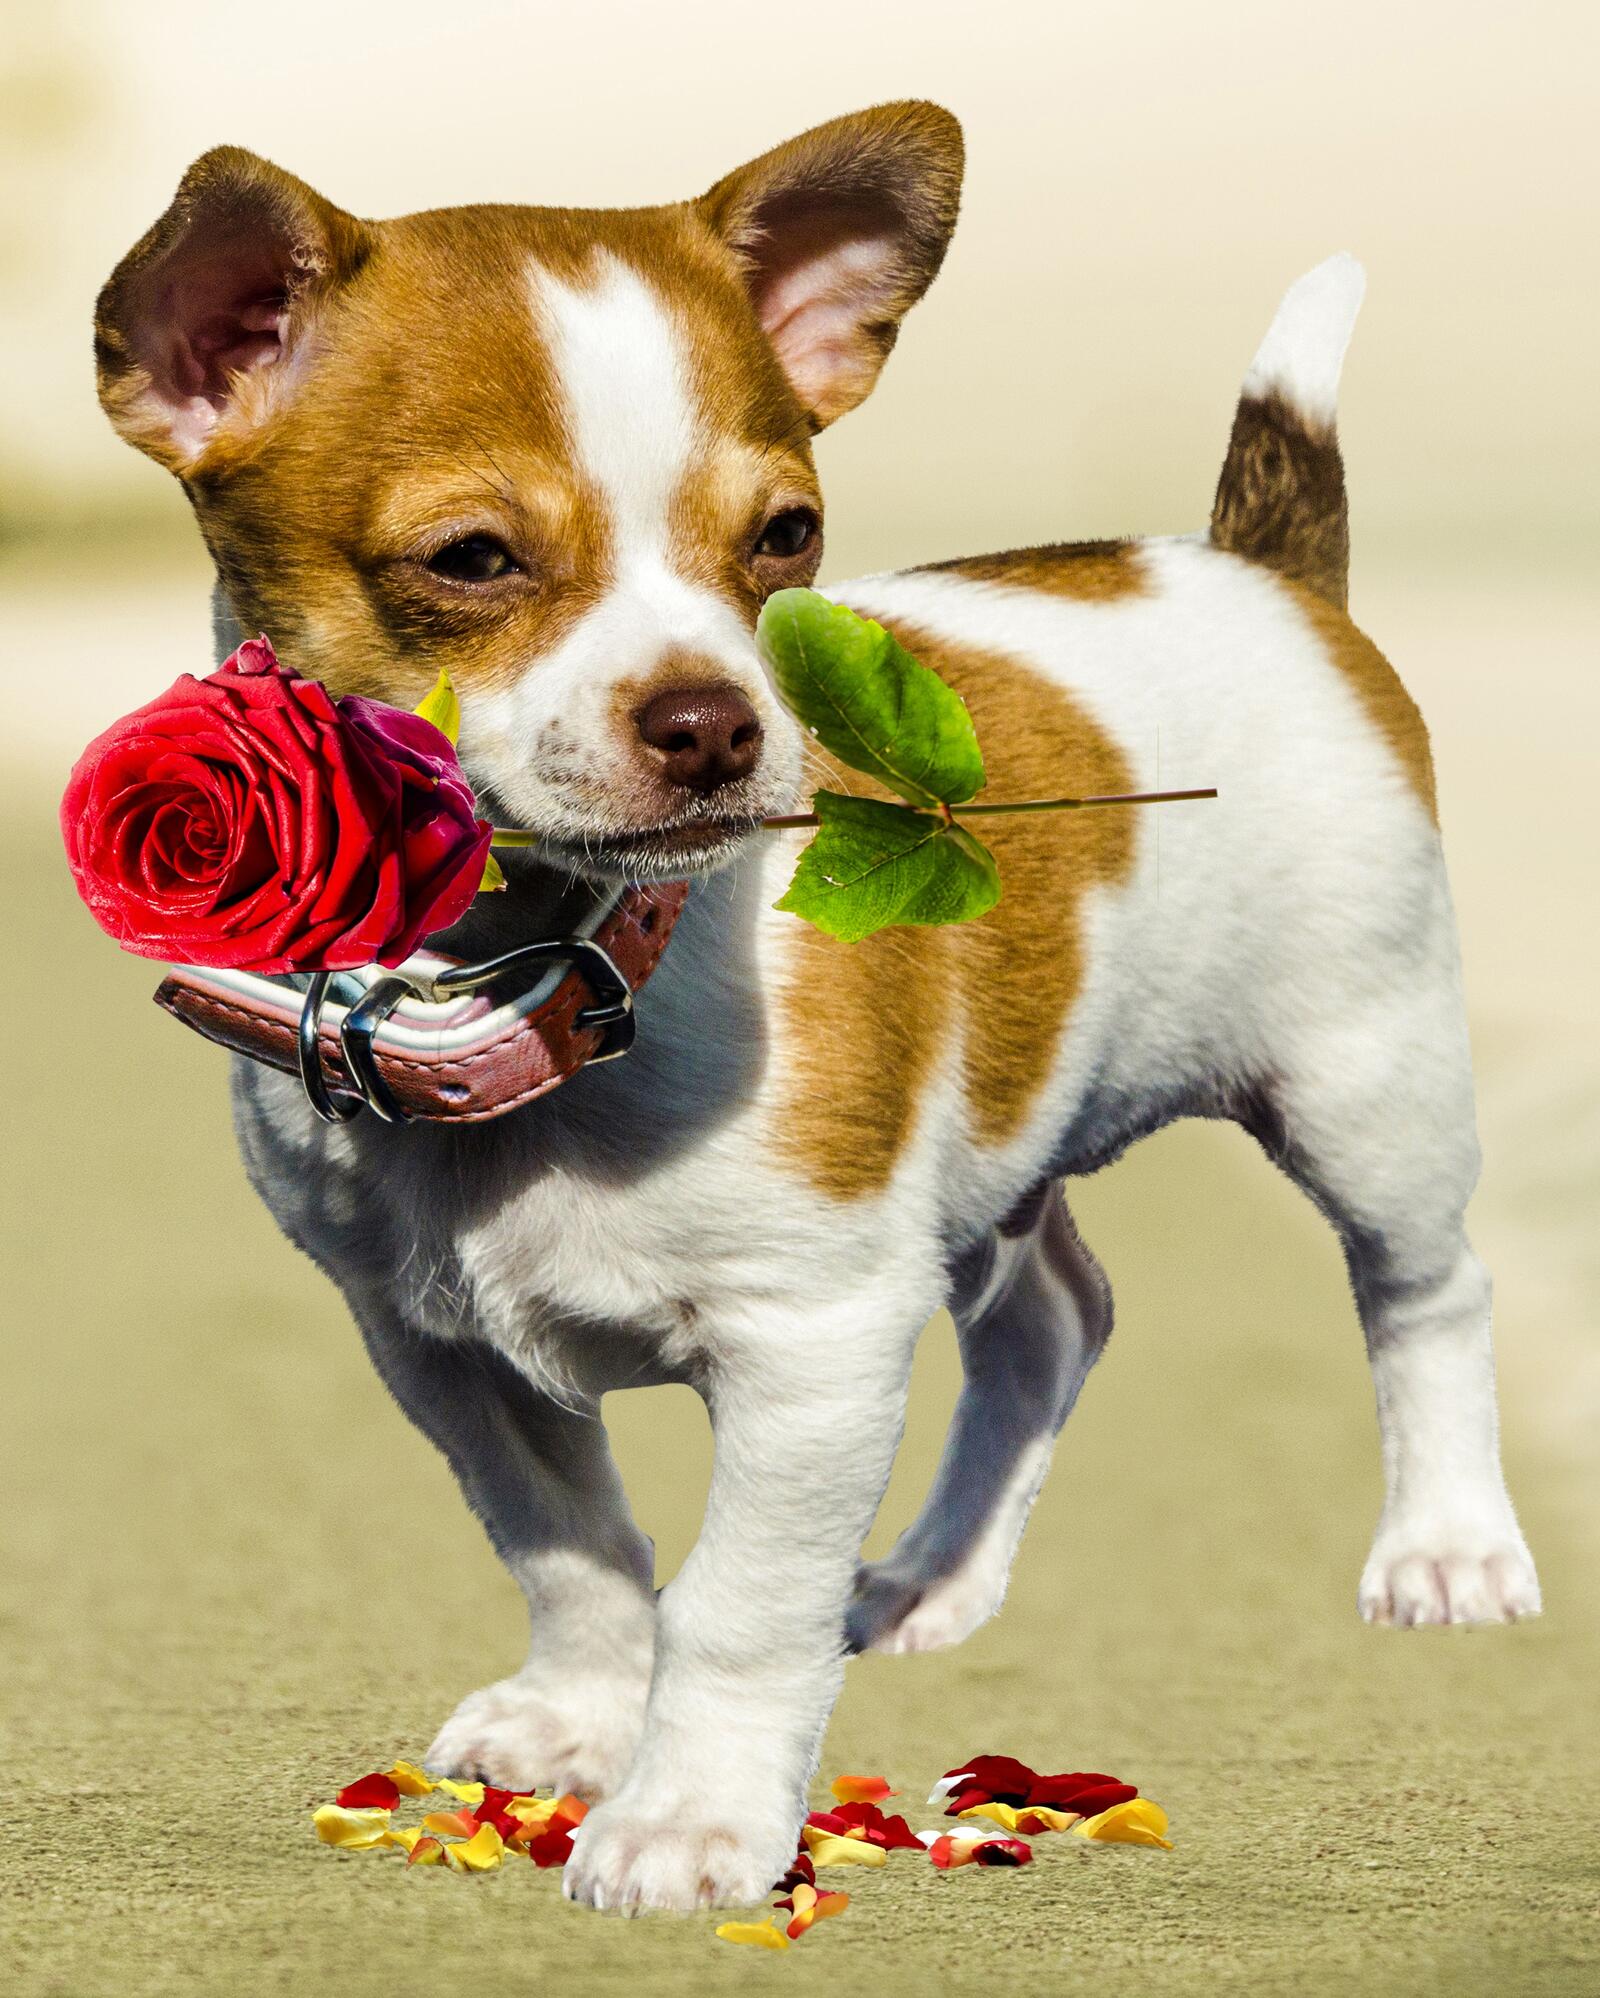 Free photo A puppy with a rose in its teeth